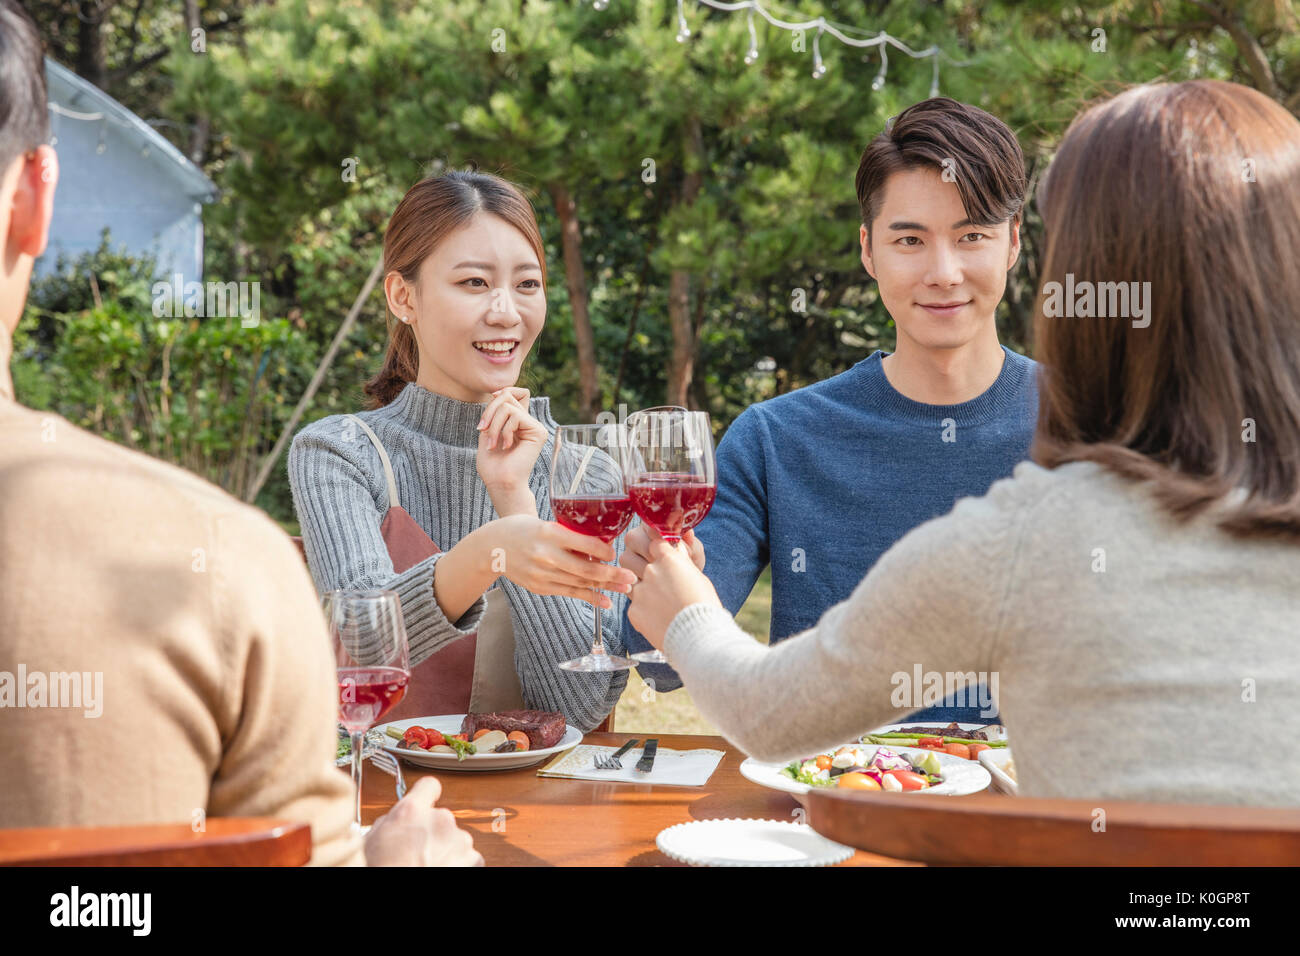 Portrait of young smiling friends toasting with wine glasses at party at garden Stock Photo